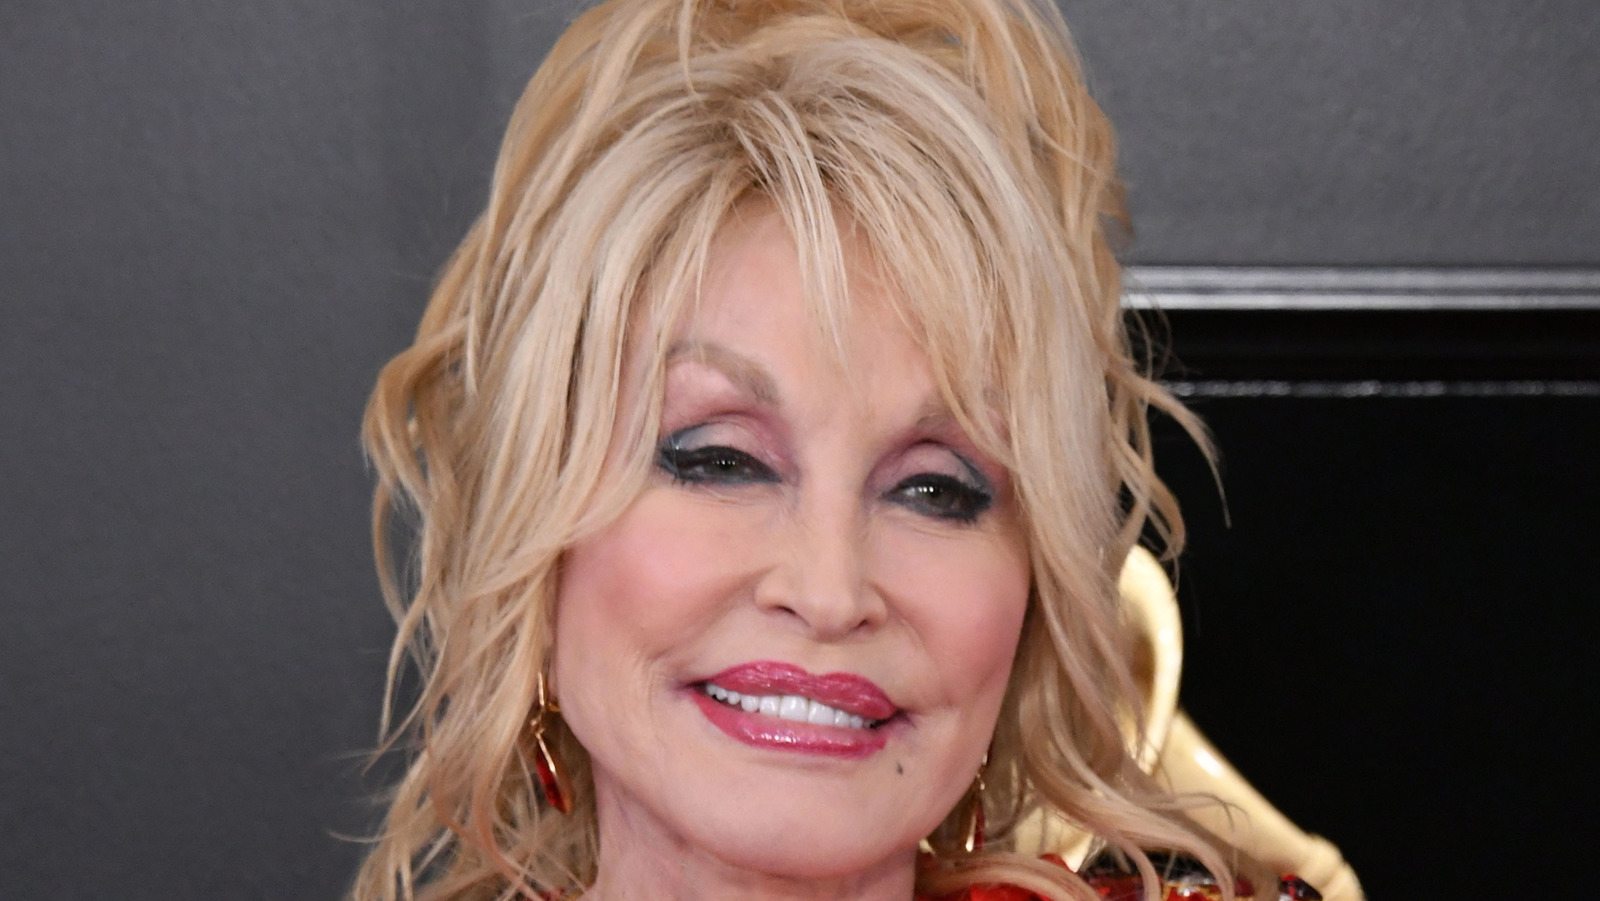 The Song Dolly Parton Is Remixing For Her Super Bowl Commercial Debut